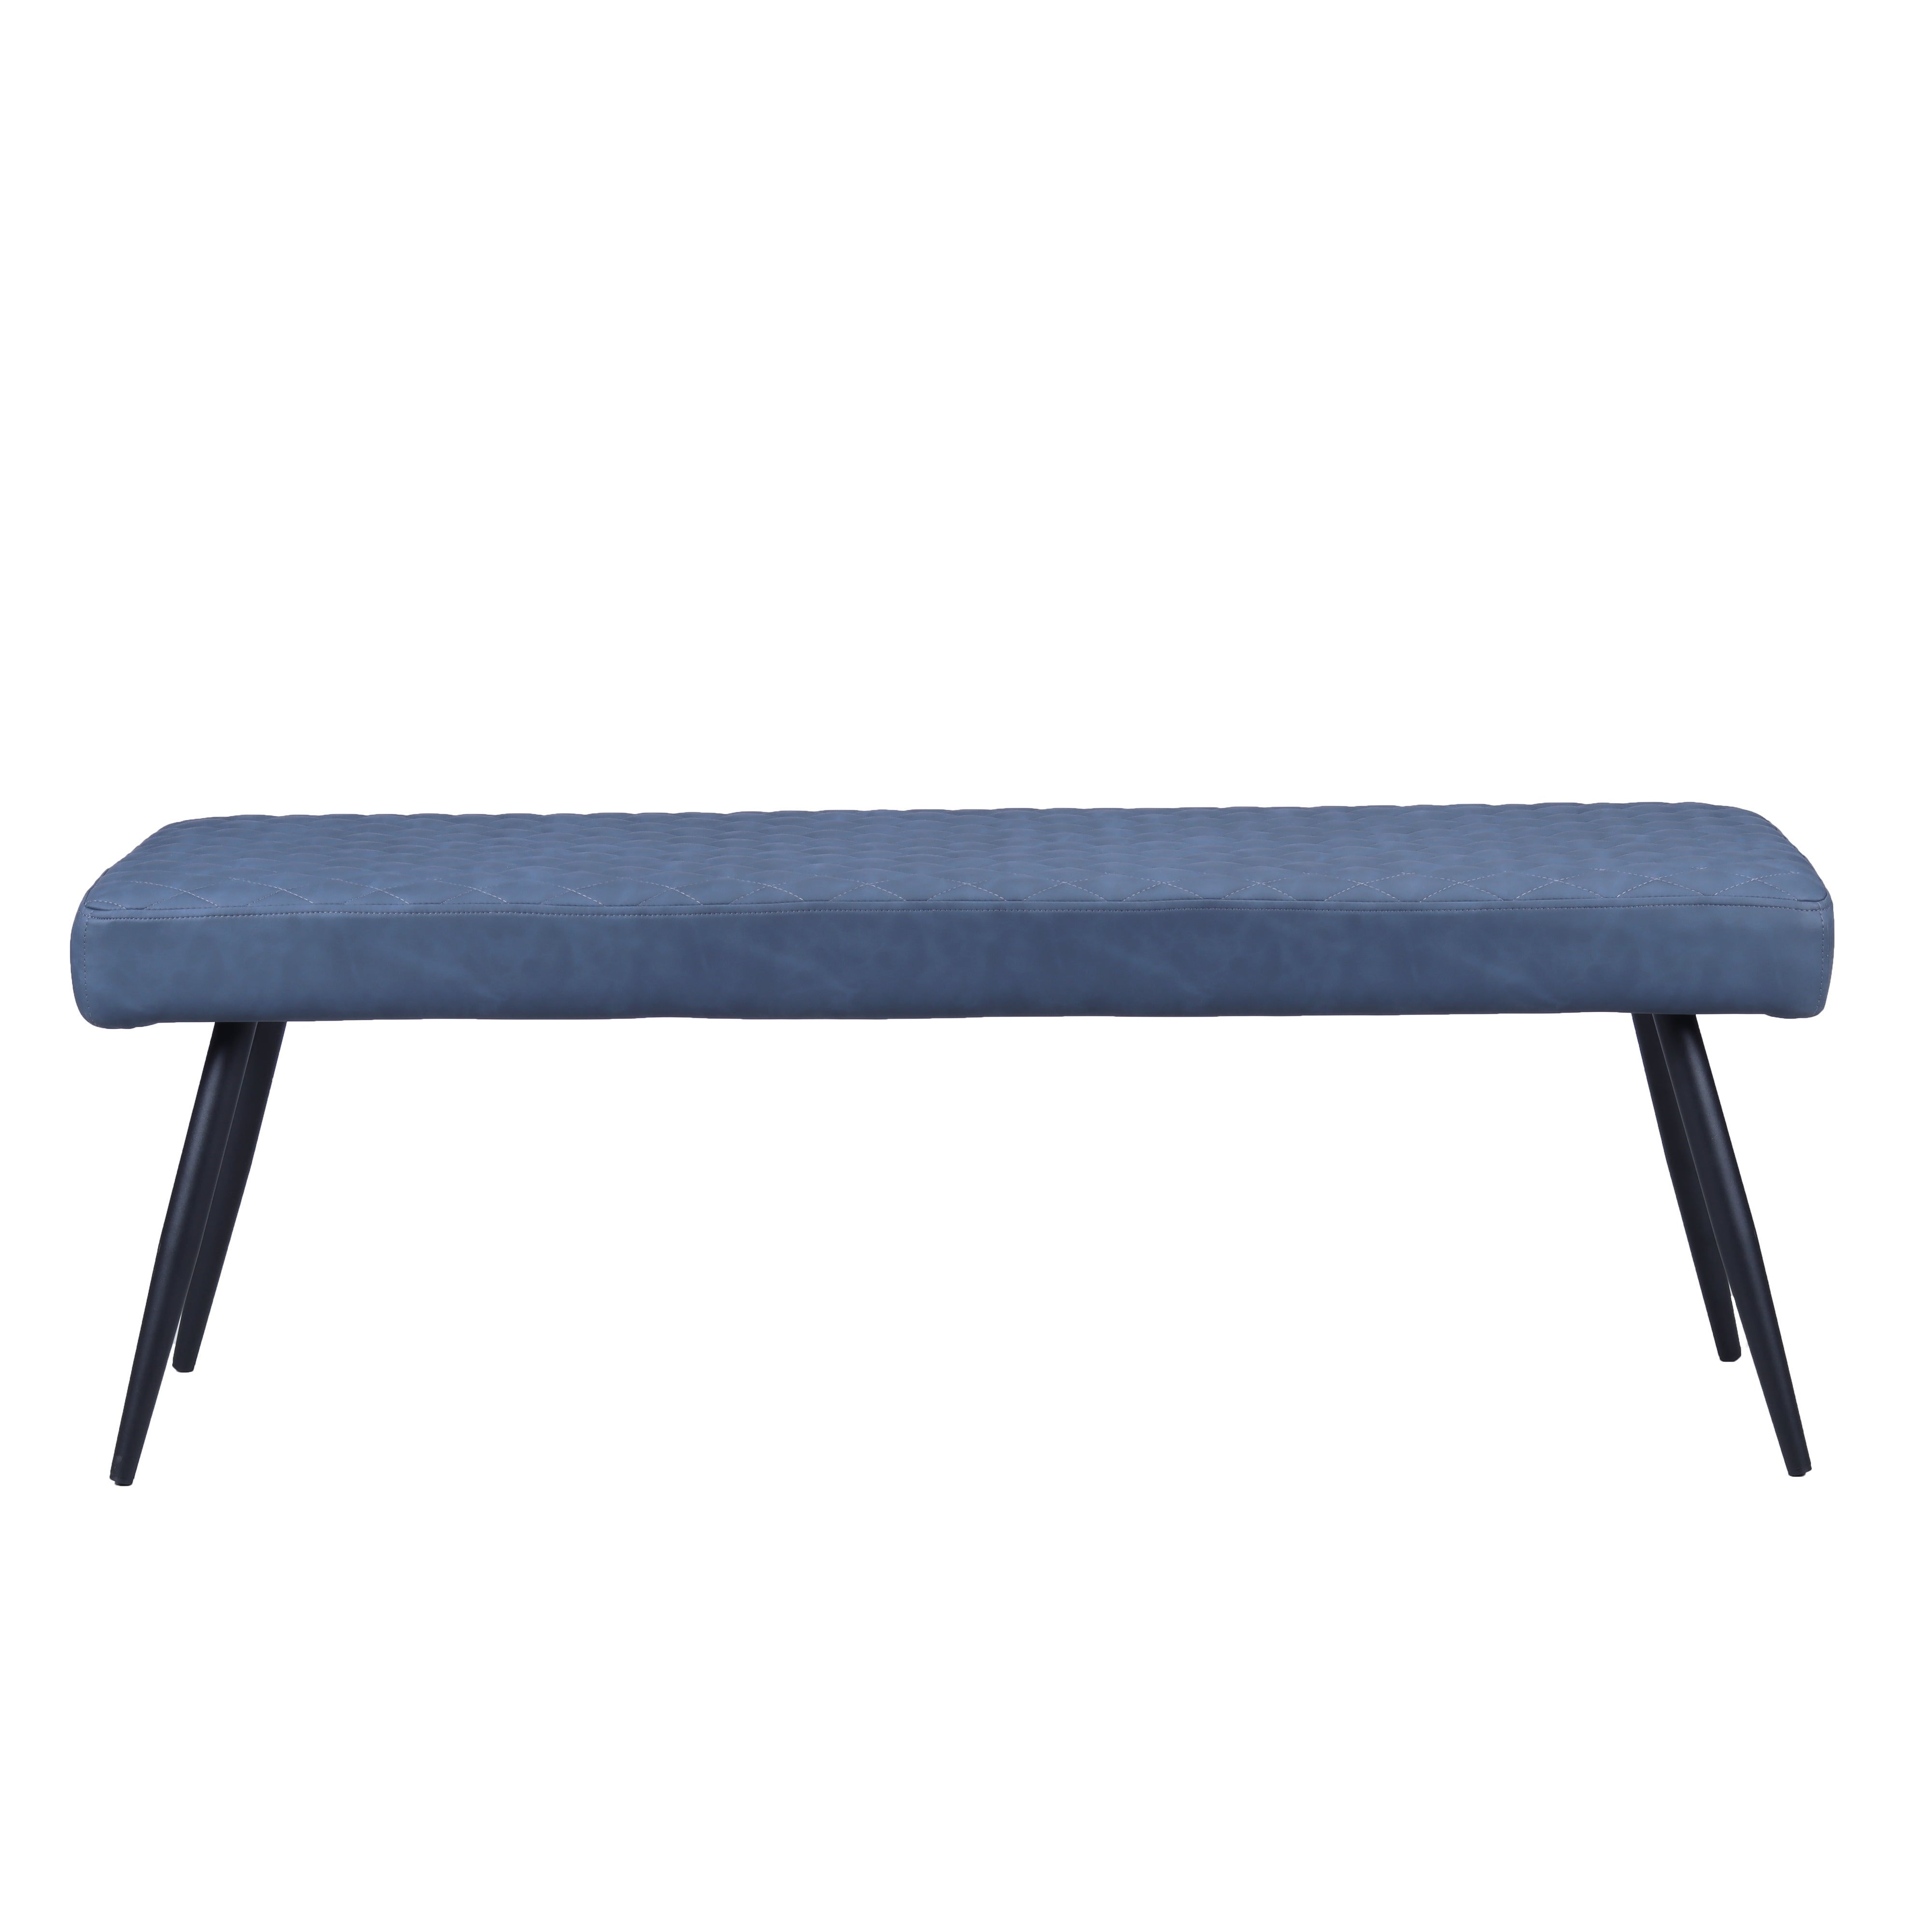 Montreal 2 Seater Dining Bench Faux Leather Navy Blue